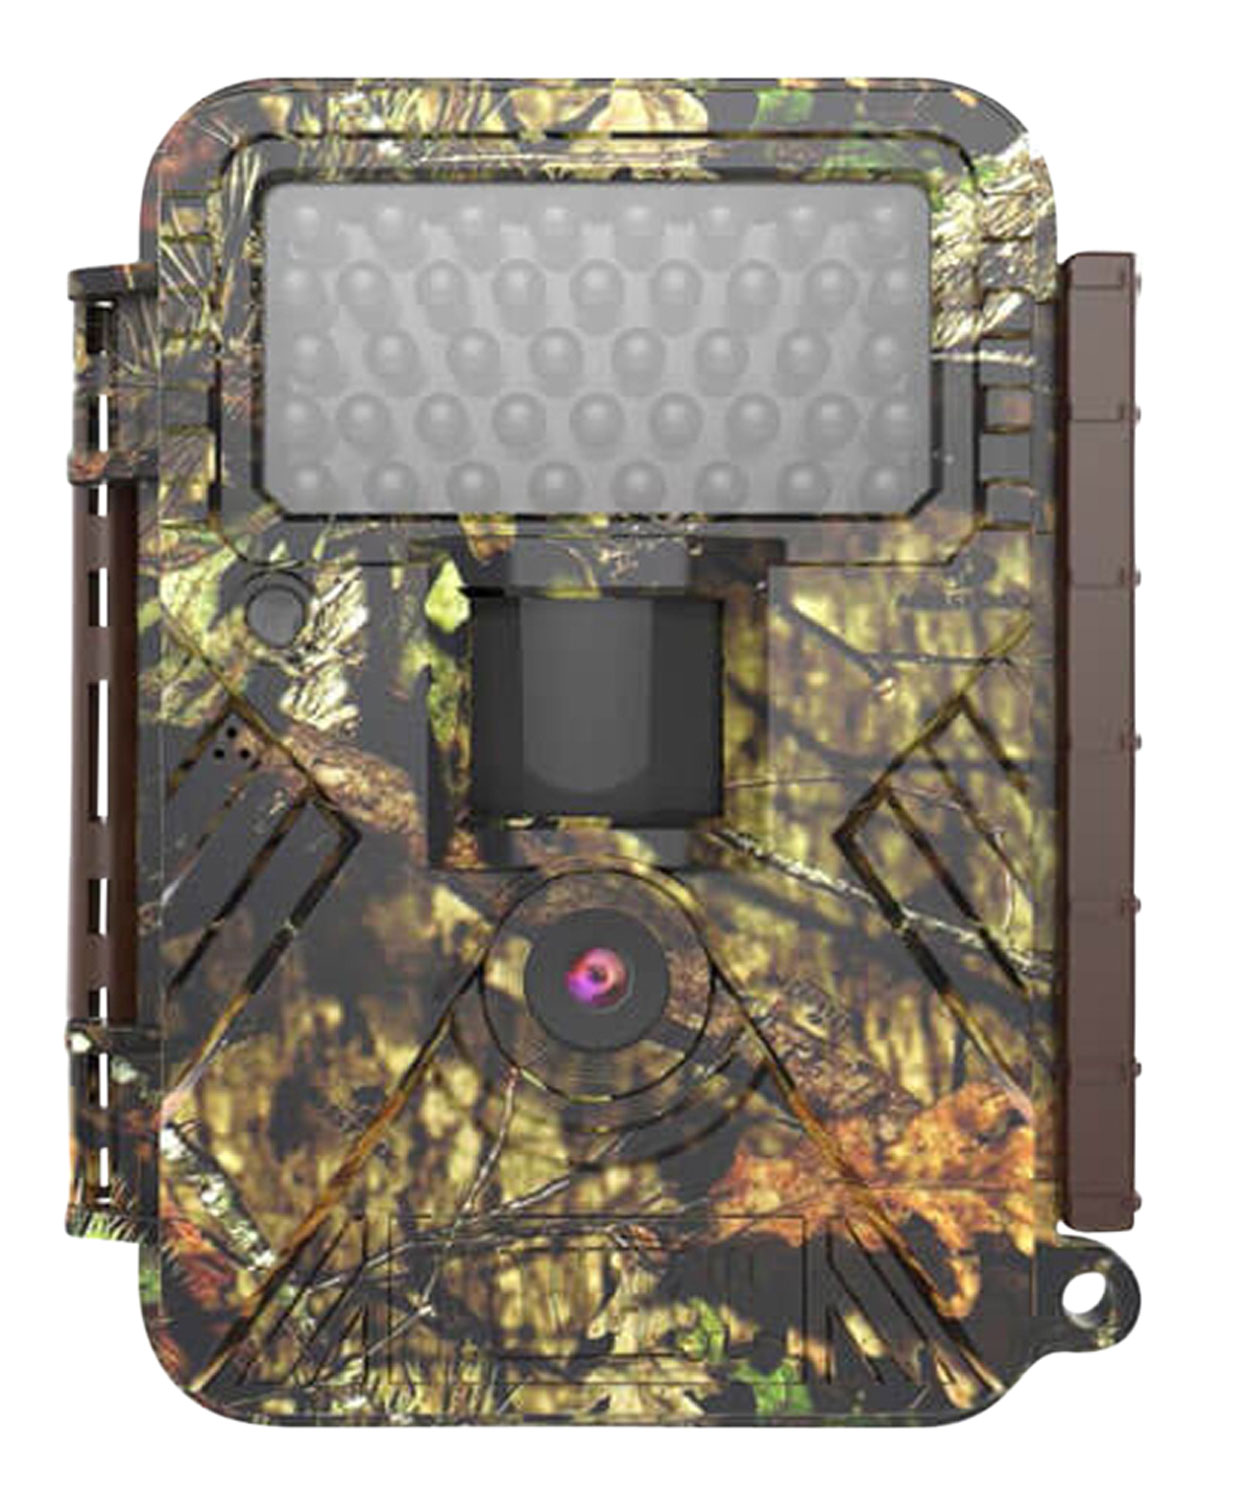 COVERT Scouting Cameras 5830 Nbf22 Brown Trail Camera for sale online 